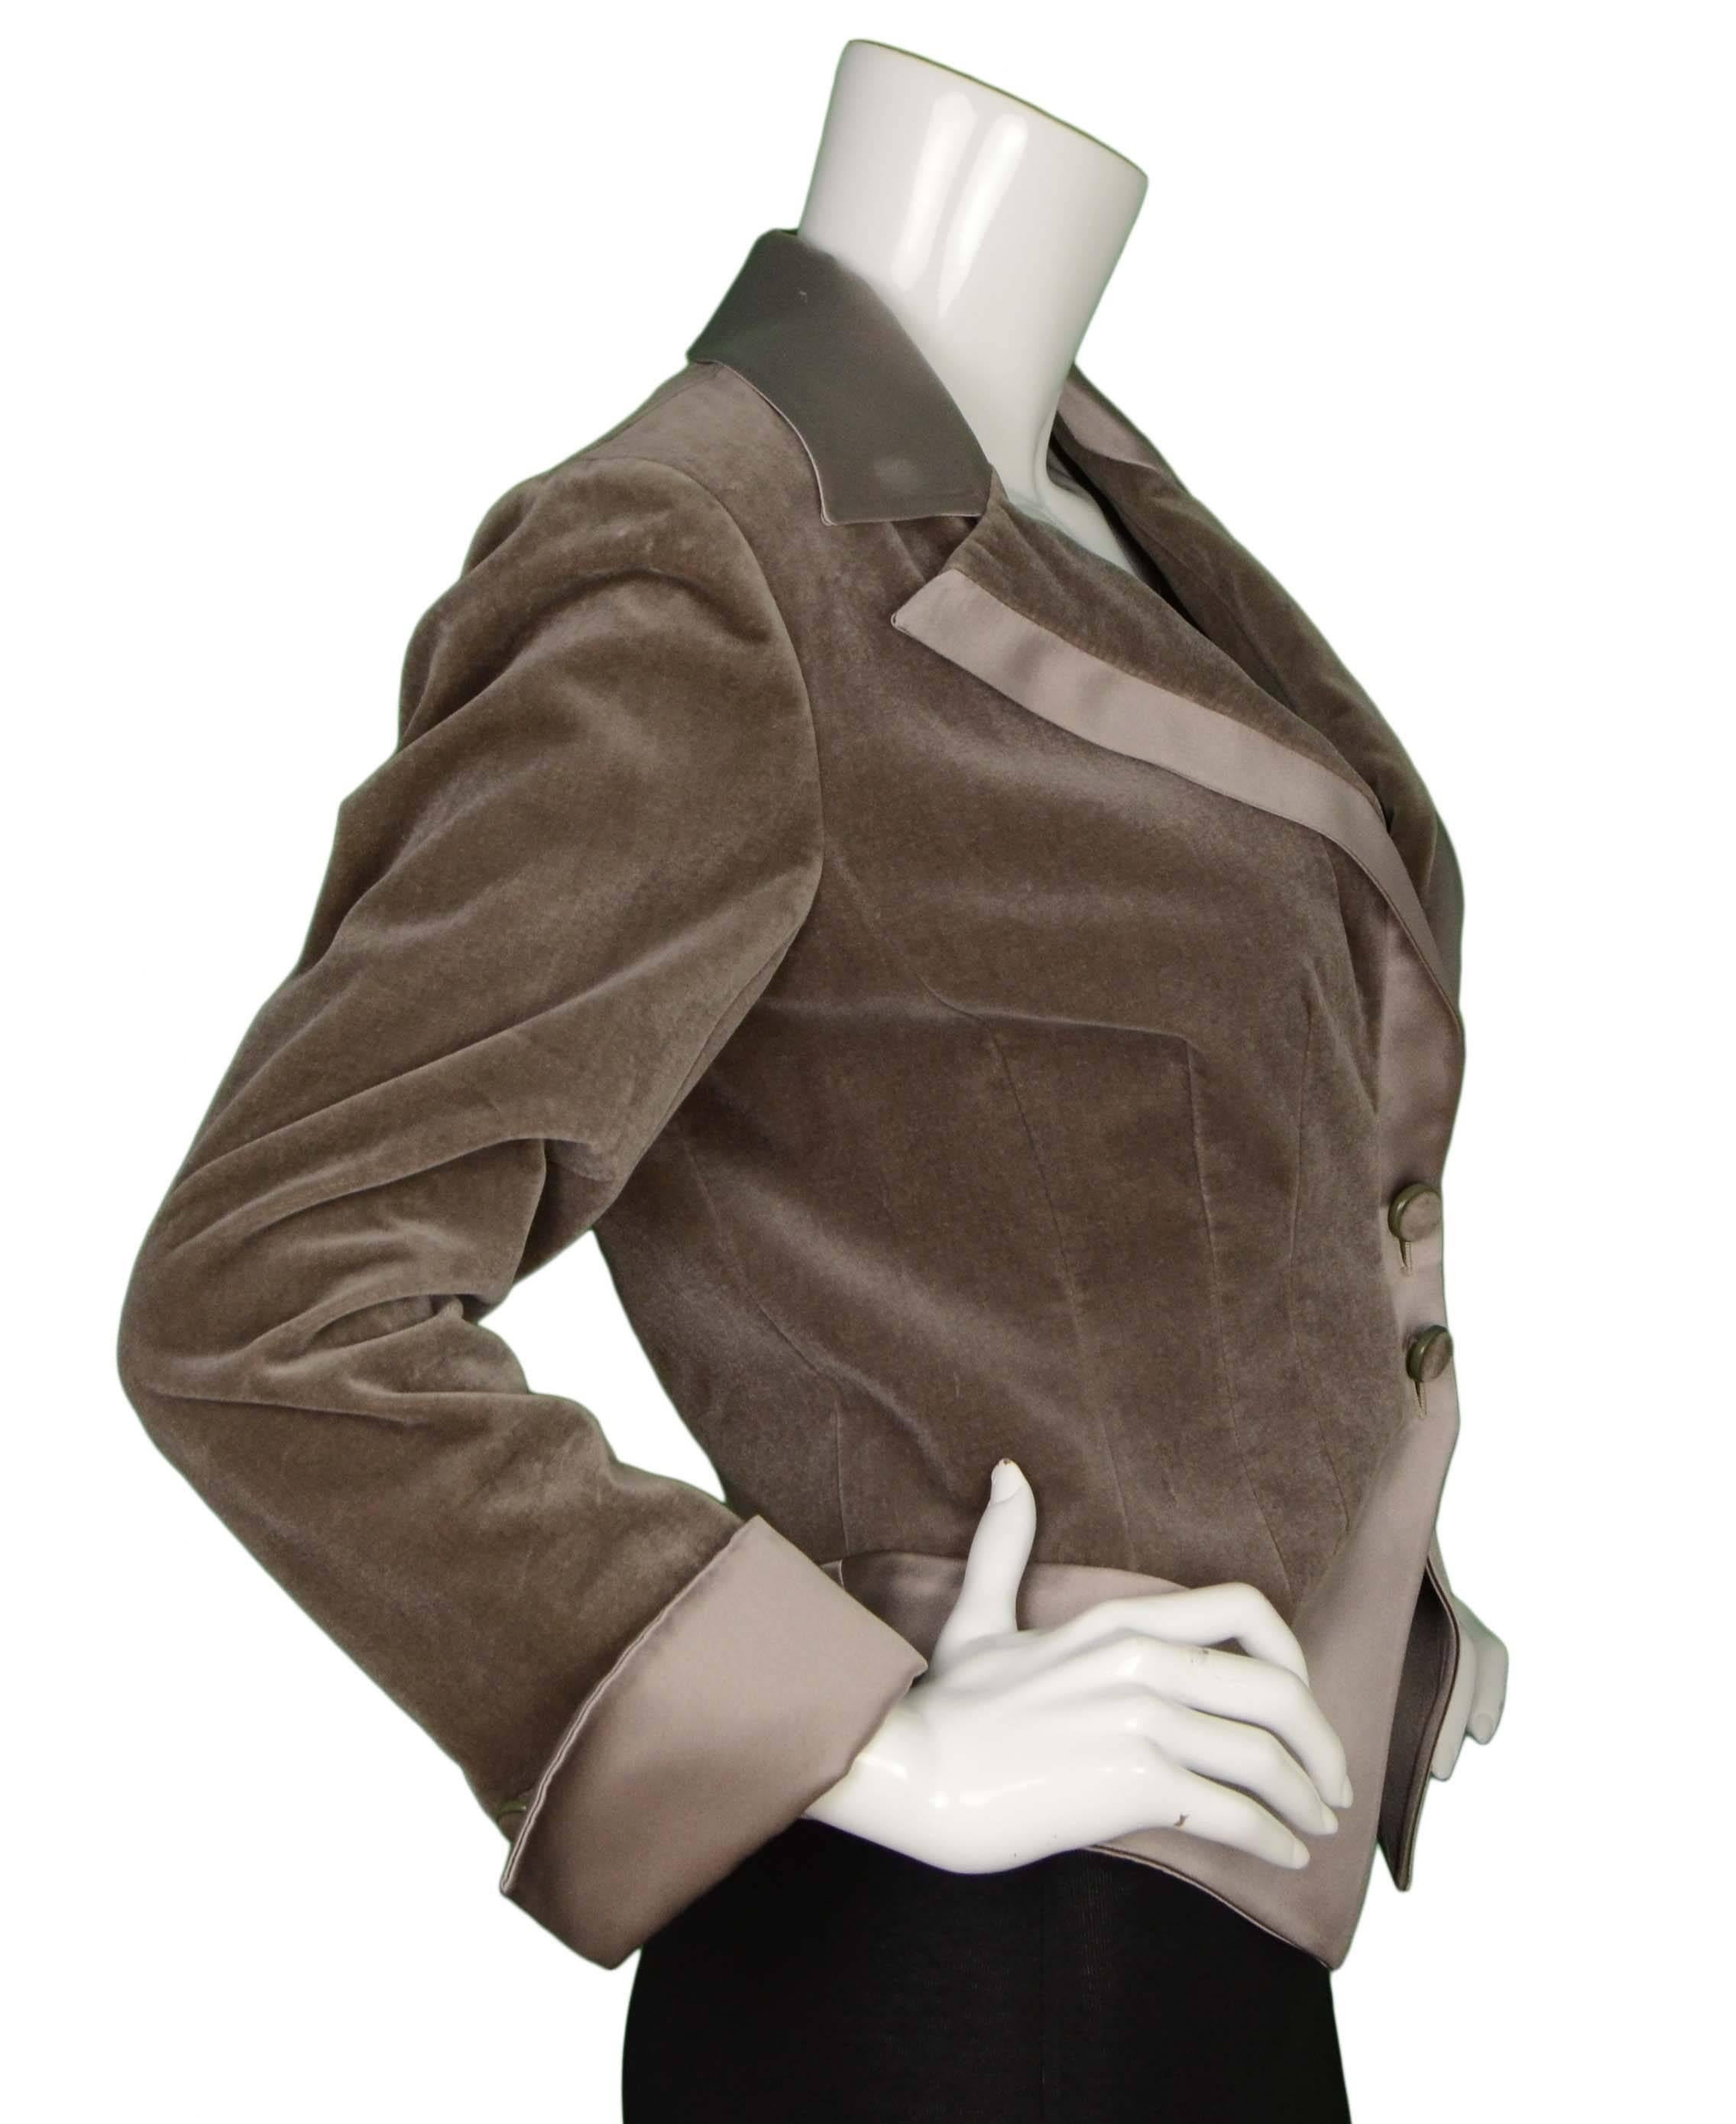 Valentino Grey Velvet Blazer 
Features silk trim throughout
Made In: Italy
Color: Grey-mauve
Composition: 70% cotton, 30% modal
Lining: Grey, 100% polyester
Closure/Opening: Front double button closure
Exterior Pockets: None
Interior